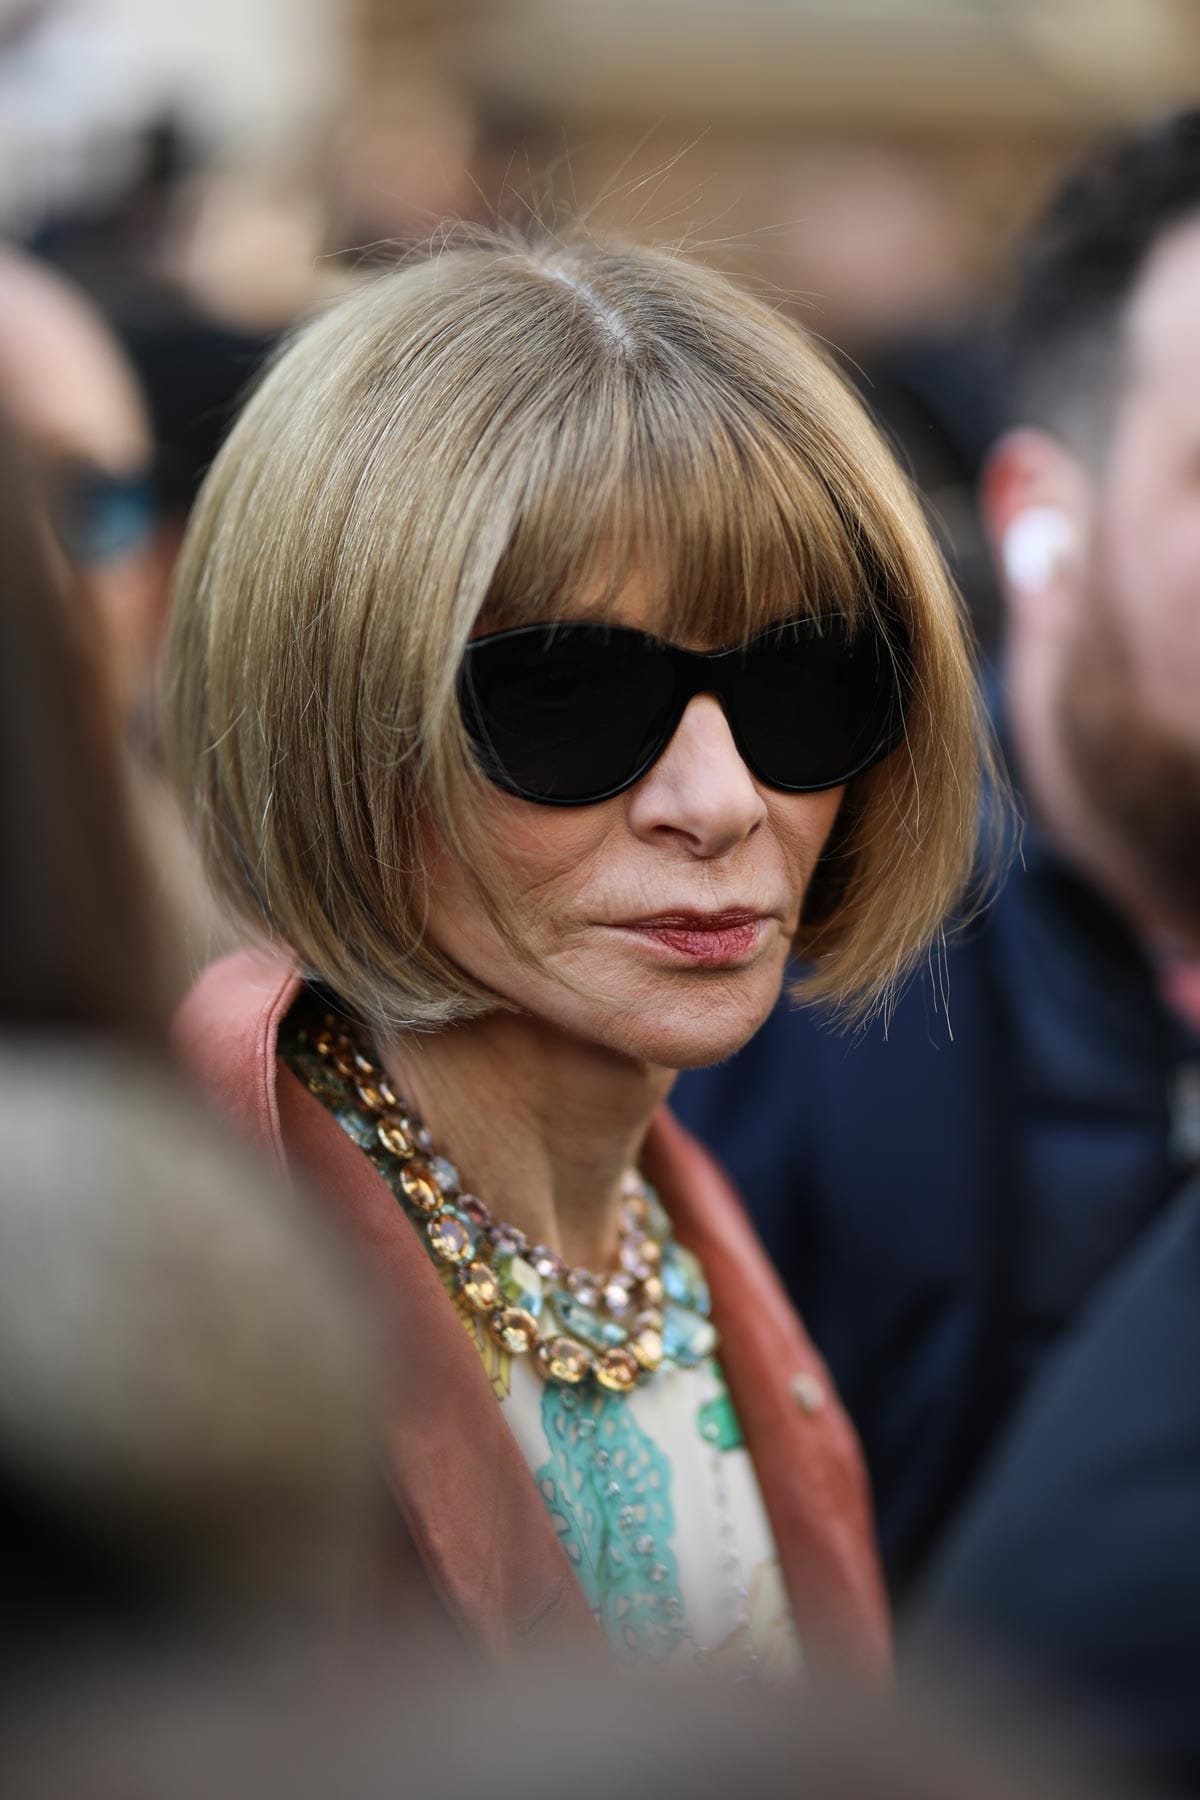 Anna Wintour kept her sunglasses on while firing Pitchfork staff, writer  says | Business Insider India